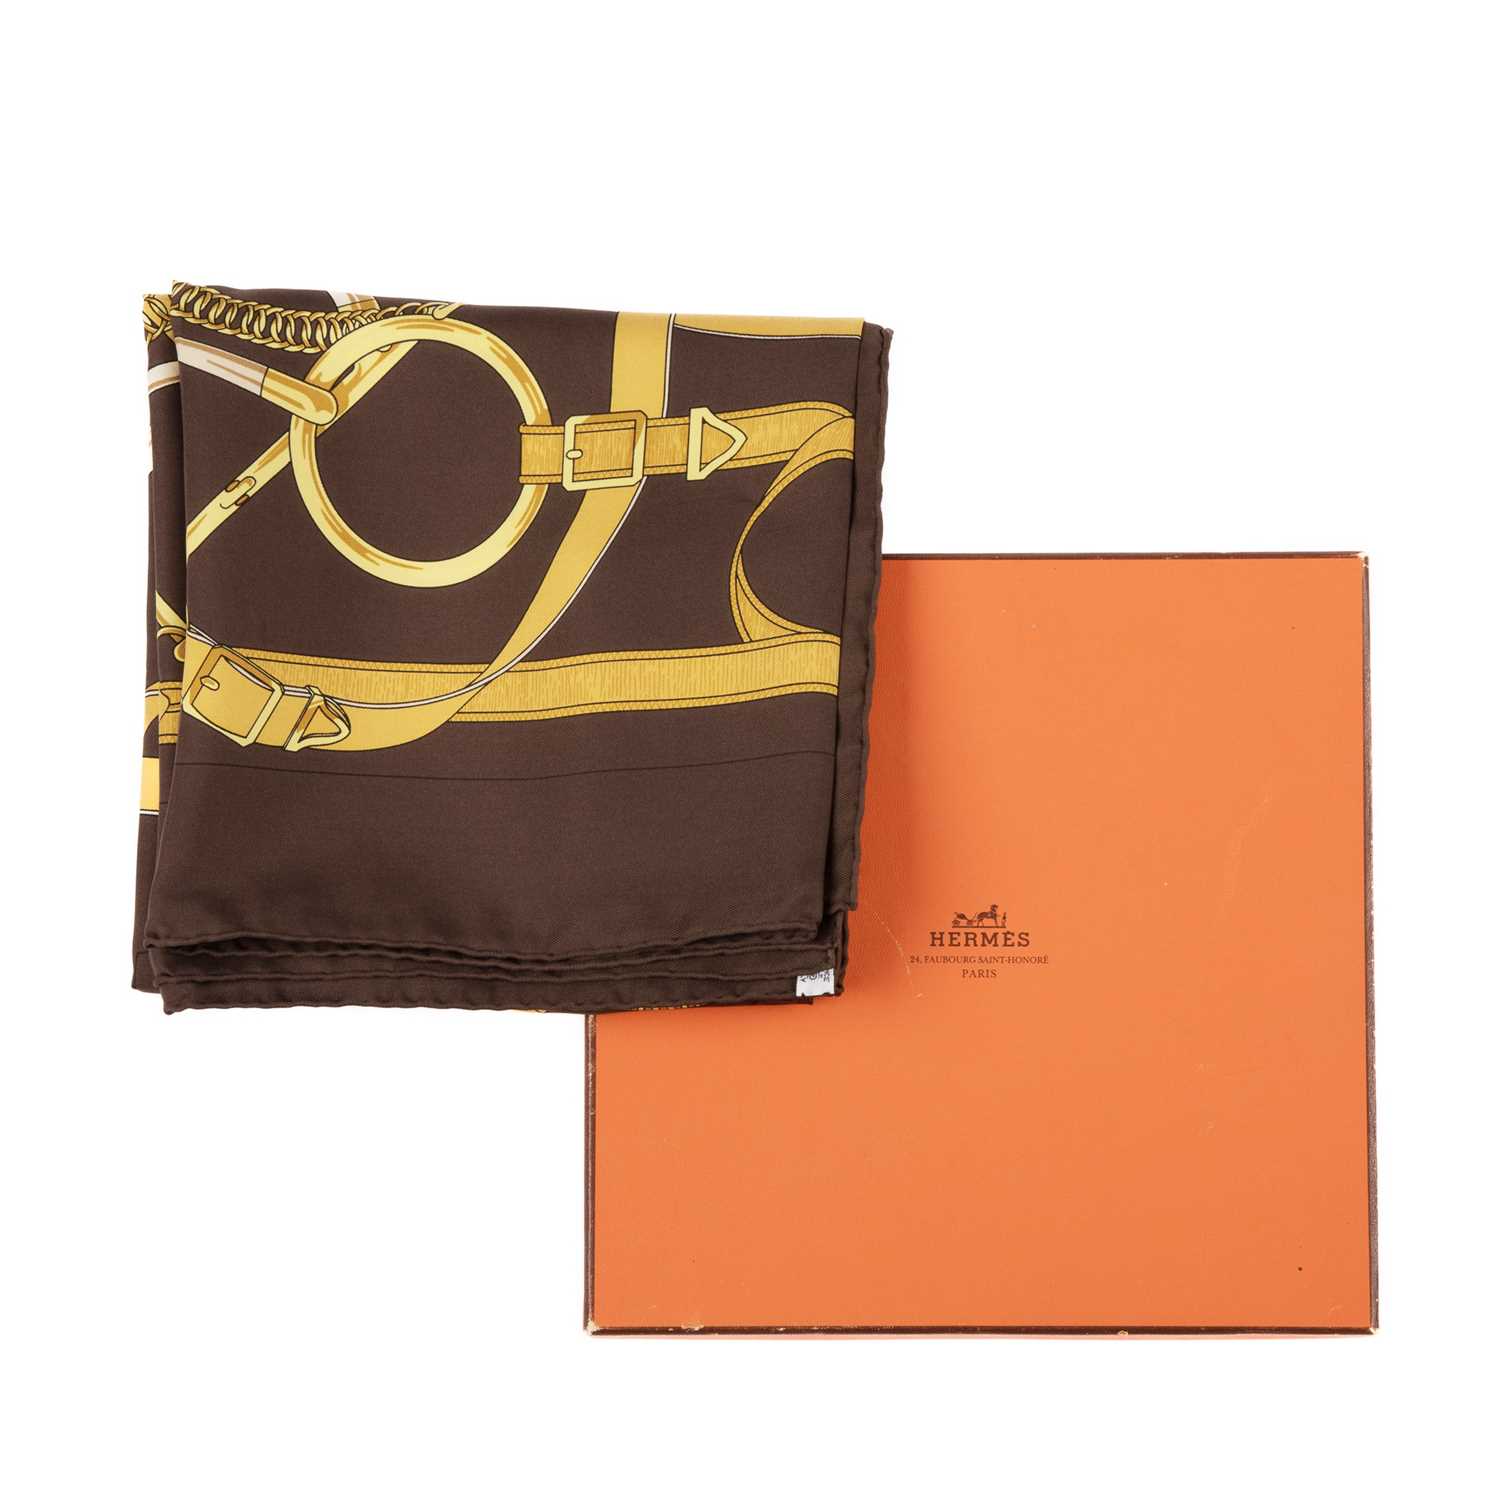 Hermes, an Eperon d'Or silk scarf, designed by Henri d'Origny, first issued in 1974, with an - Image 3 of 3